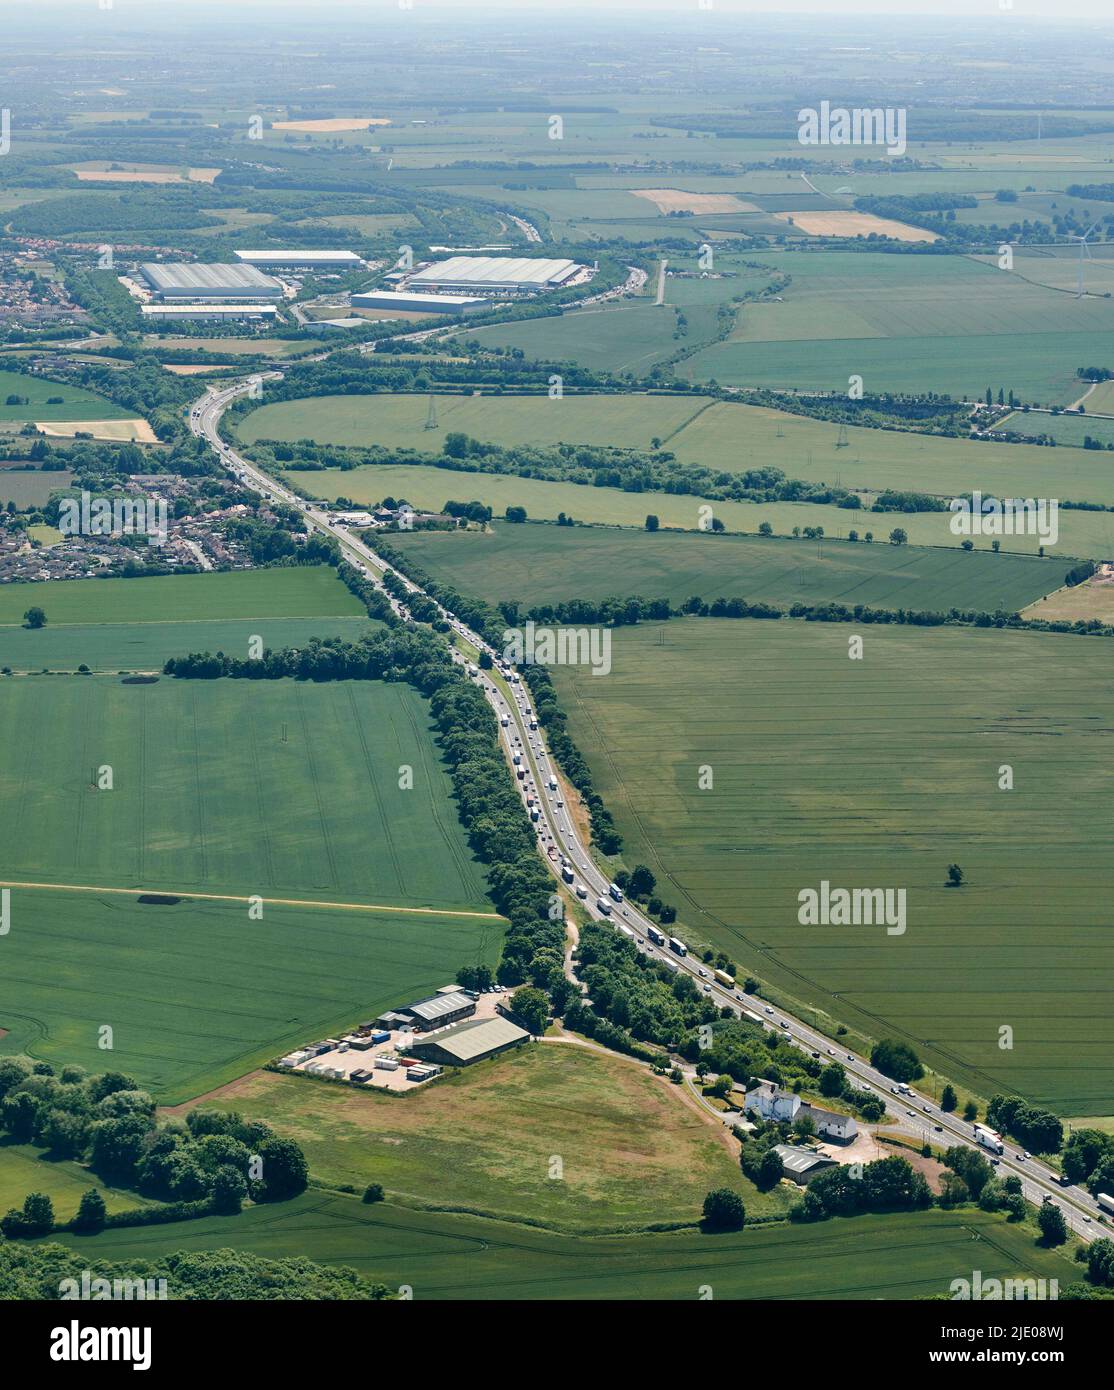 An aerial view of the A1 Motorway and Red Hall industrial estate, City of Doncaster, South Yorkshire, Northern England, UK Stock Photo